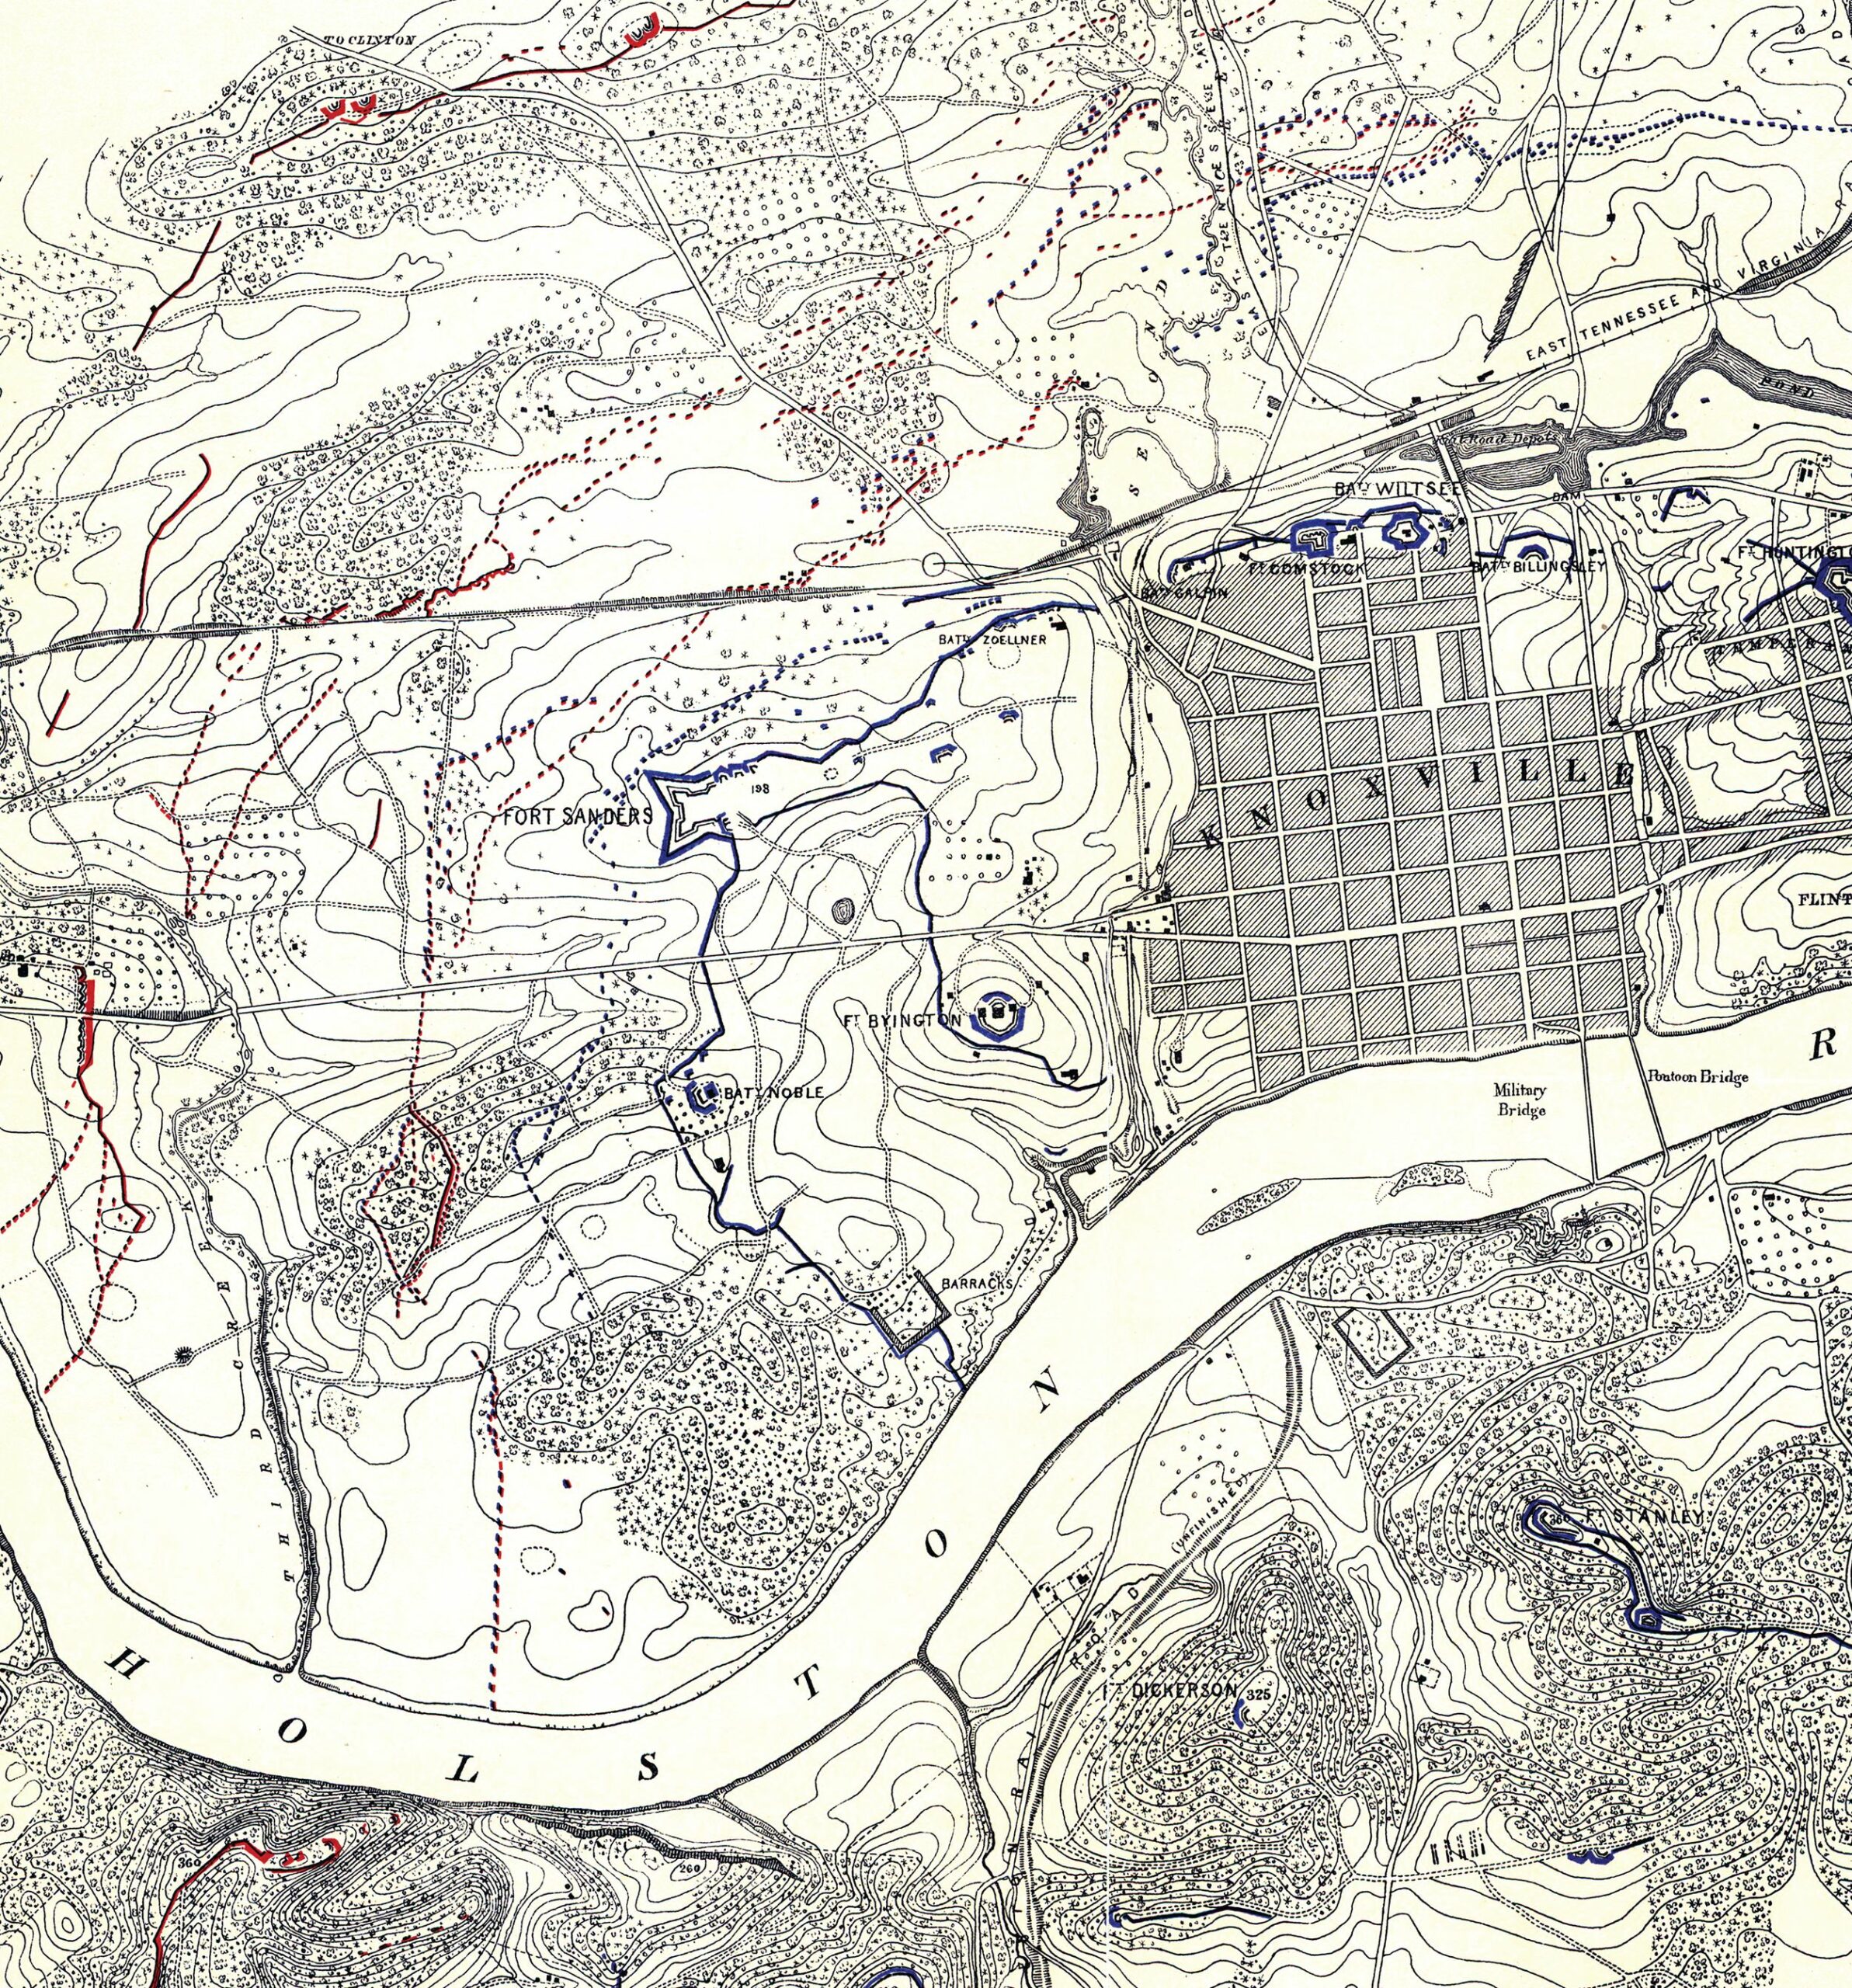 A period map shows the prominent position held by Fort Sanders in the western approaches to the Union defenses at Knoxville. From the tall parapets of the fort, Yankee infantry could fire down on the Confederates as they tried to negotiate a variety of obstructions, including ditches, abatis, and telegraph wire strung between tree stumps.